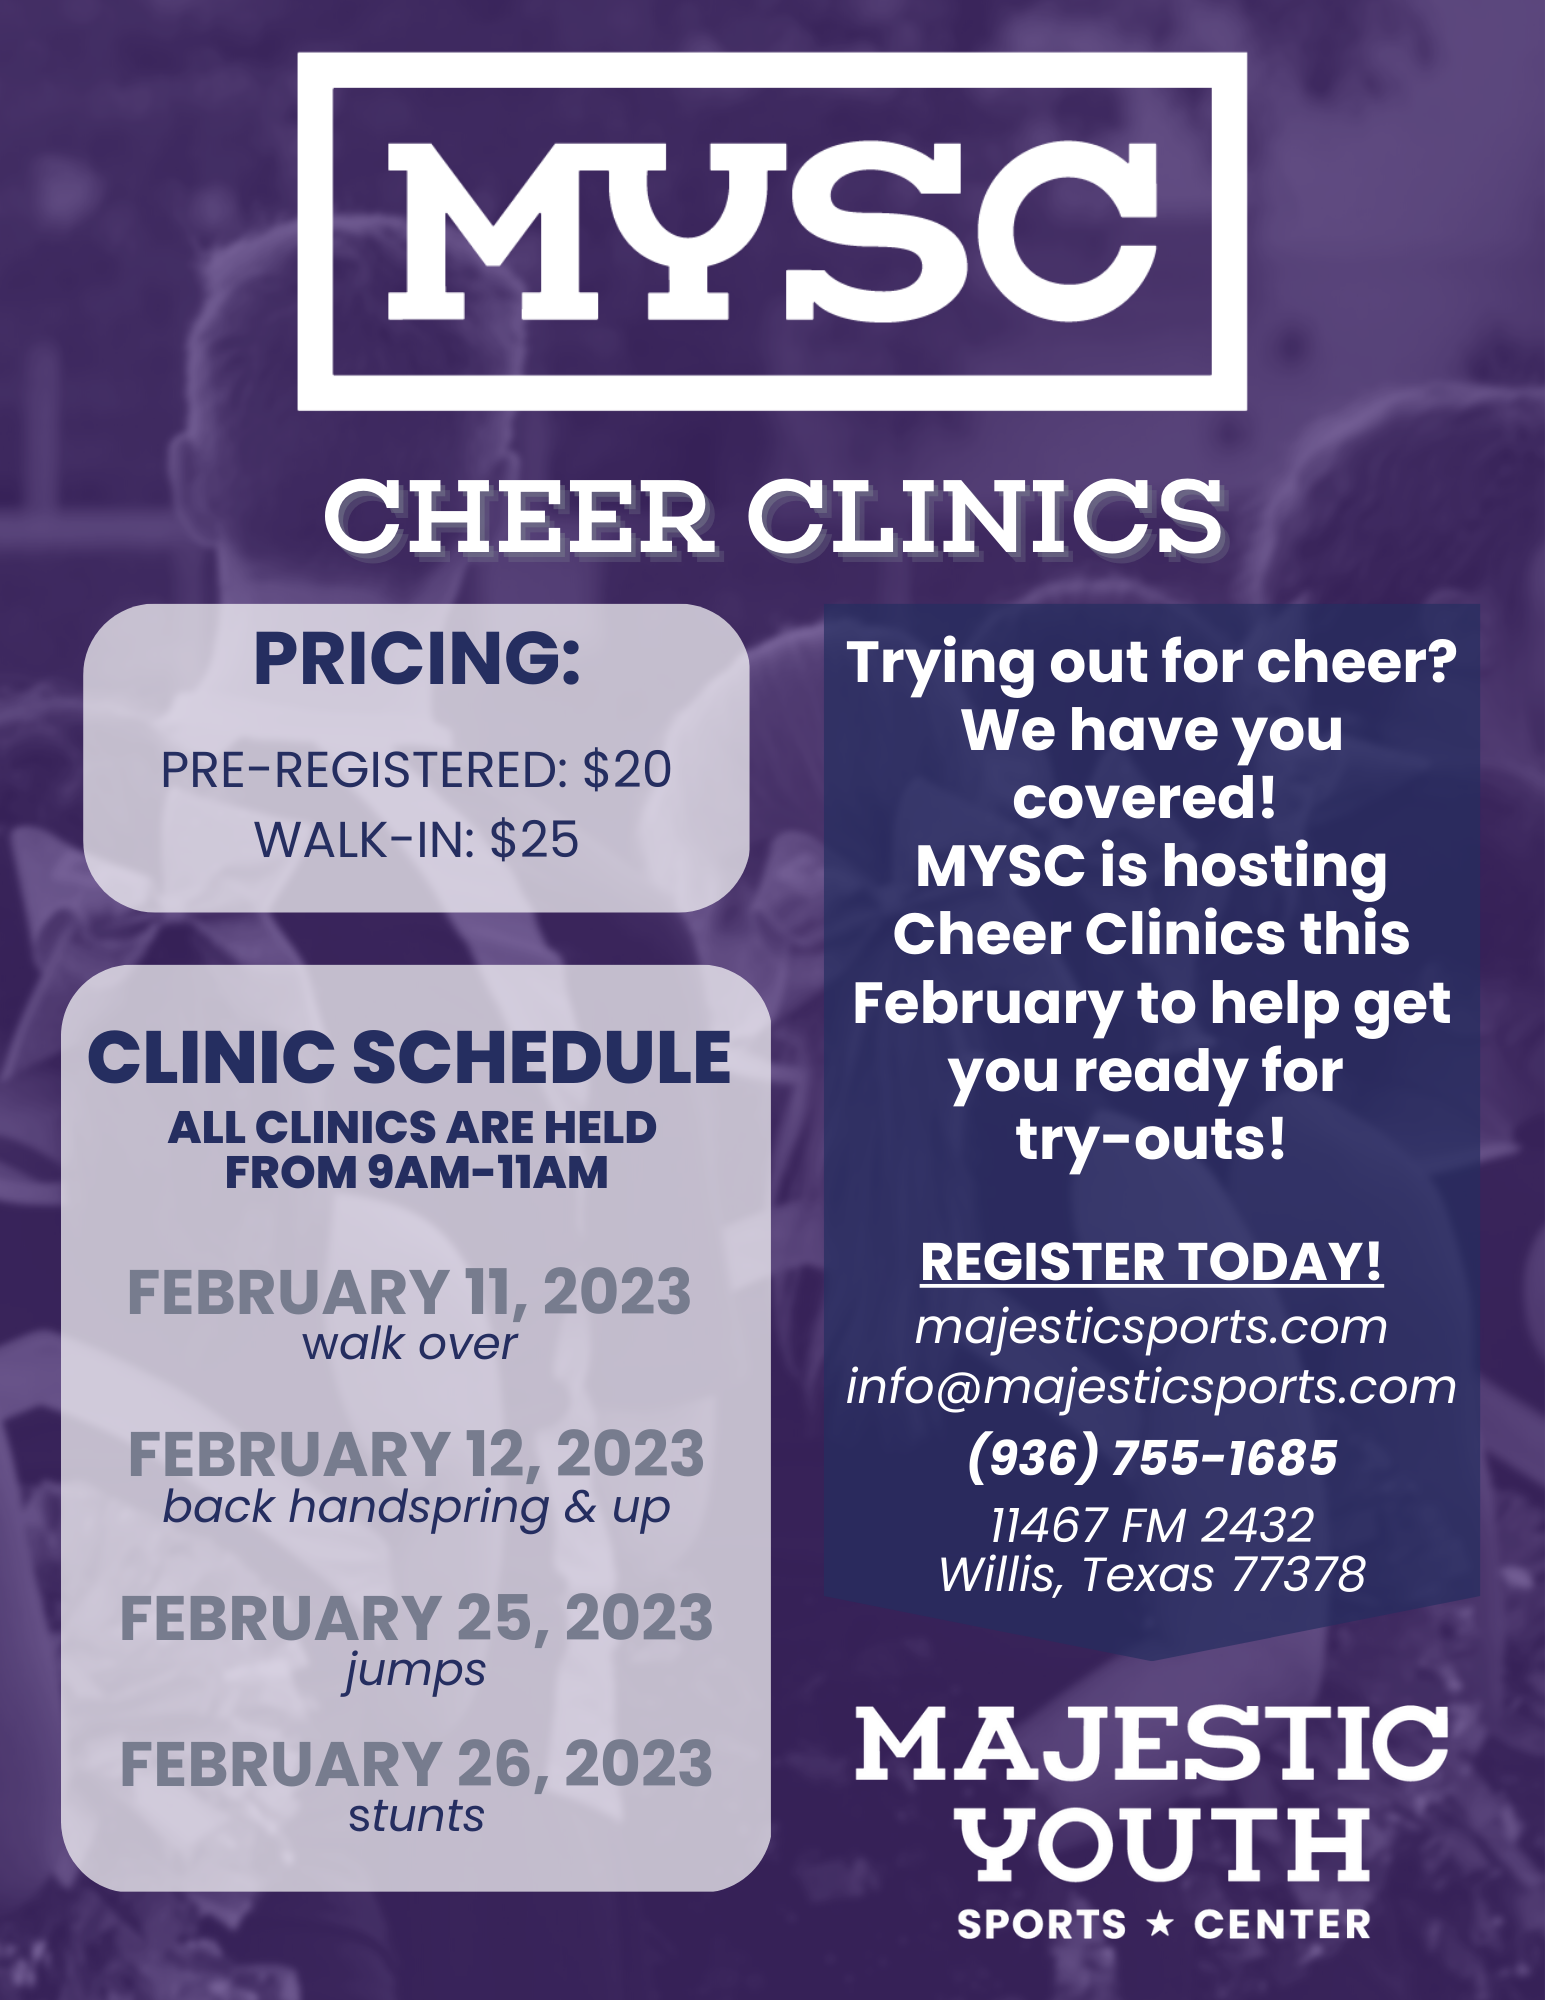 Trying out for Cheer? We have you covered! MYSC is hosting Cheer Clinics this February to help get ready for try-outs!